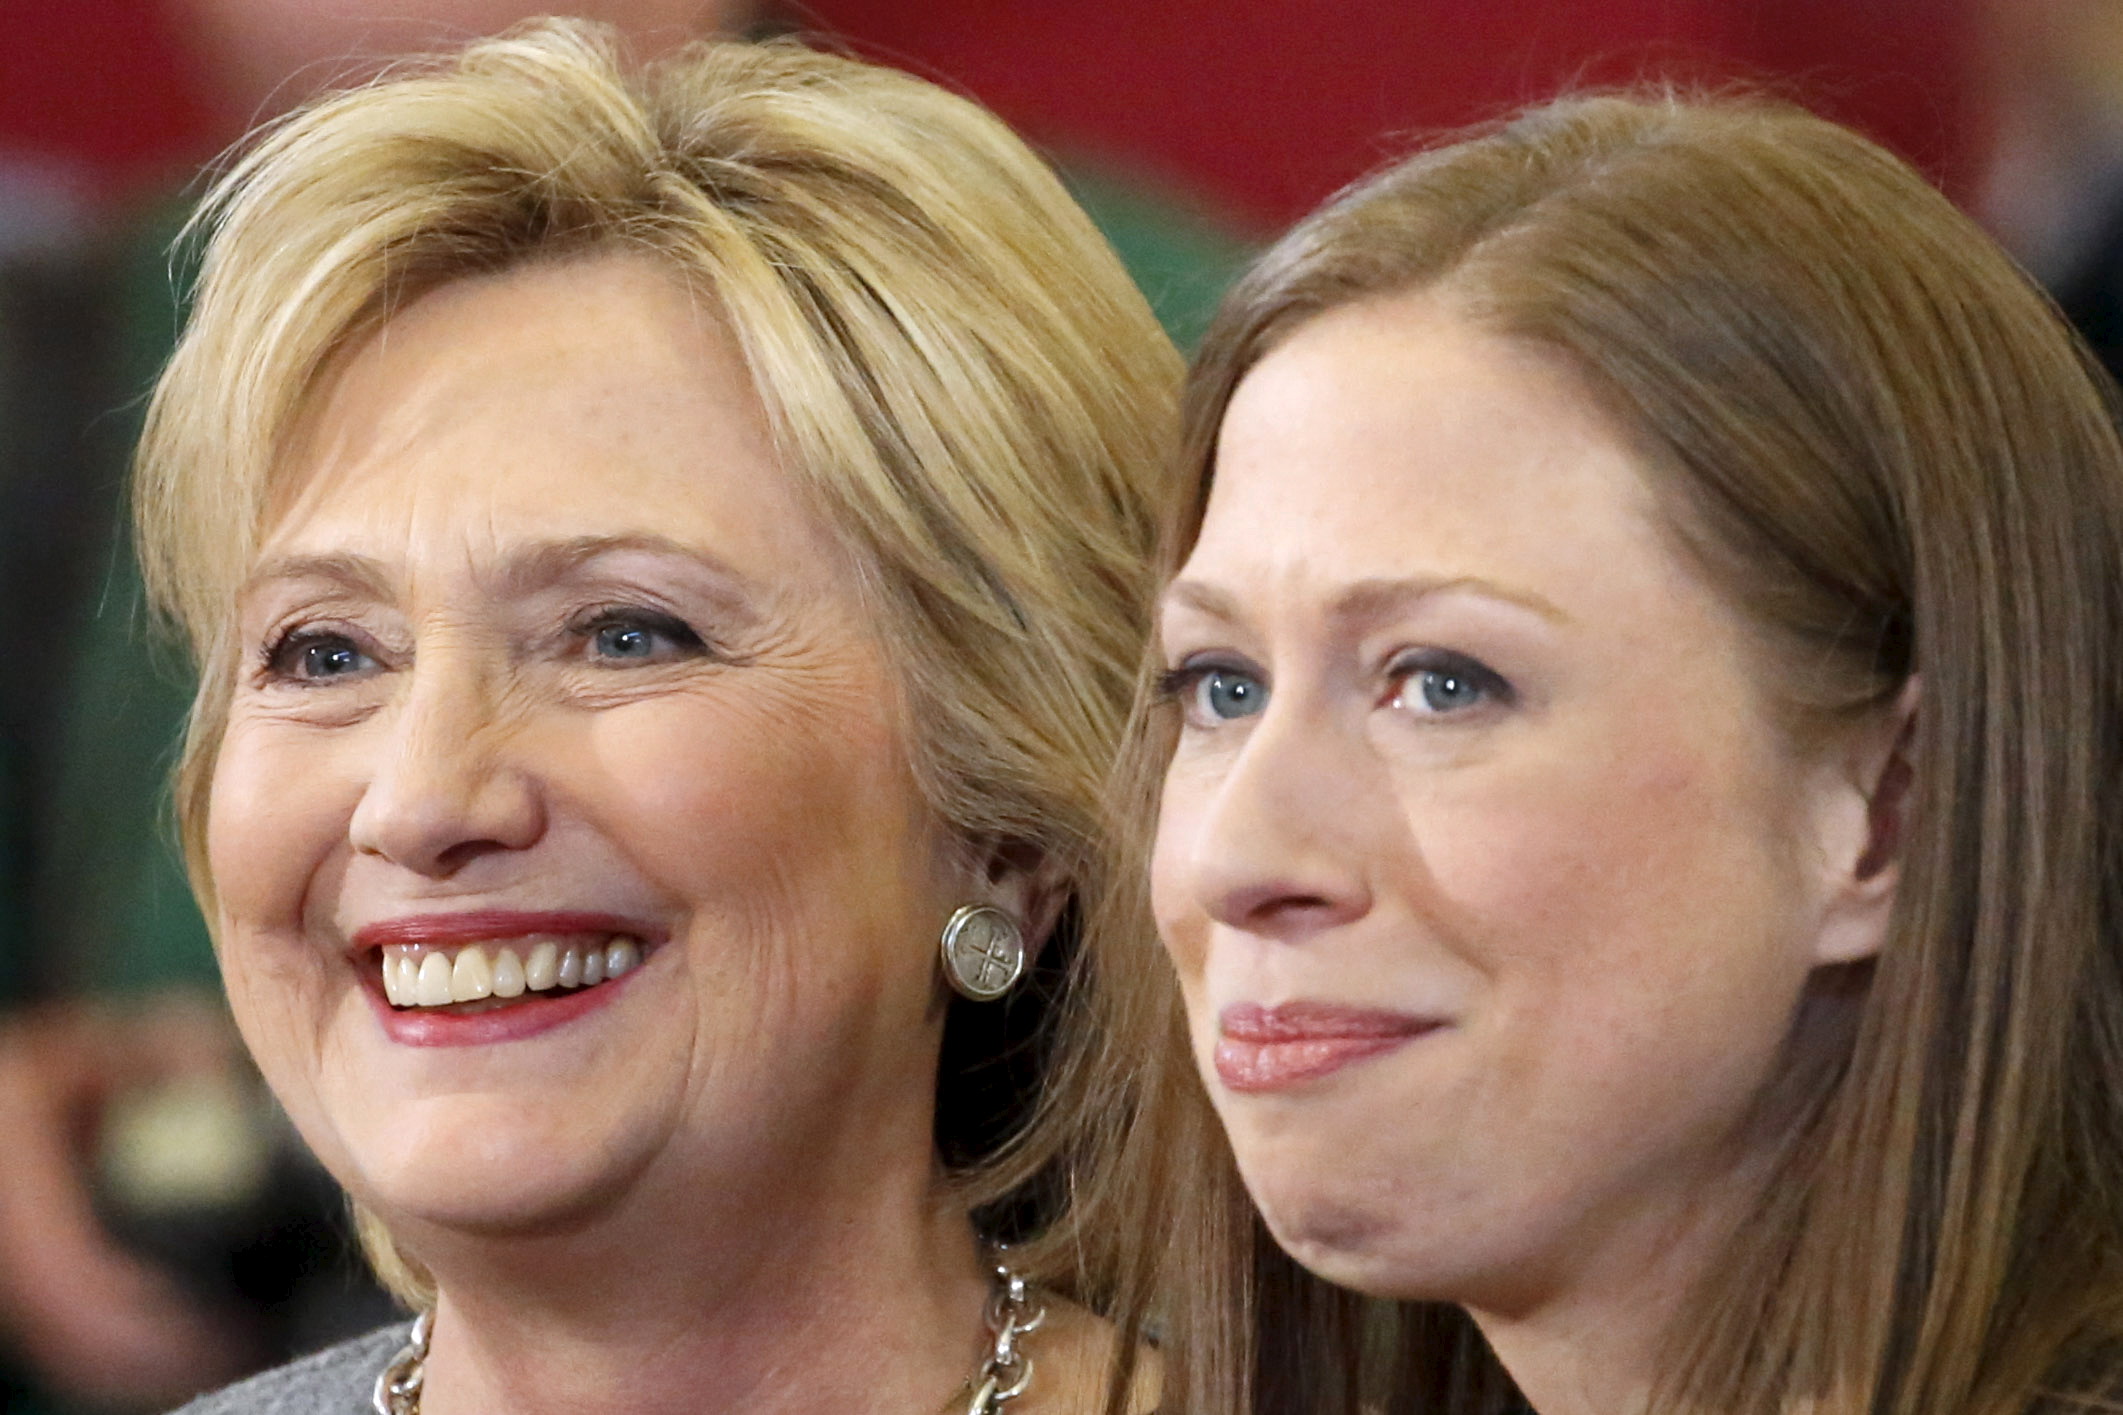 File photo of Chelsea Clinton introducing her mother U.S. Democratic presidential candidate Hillary Clinton at a campaign rally in Council Bluffs